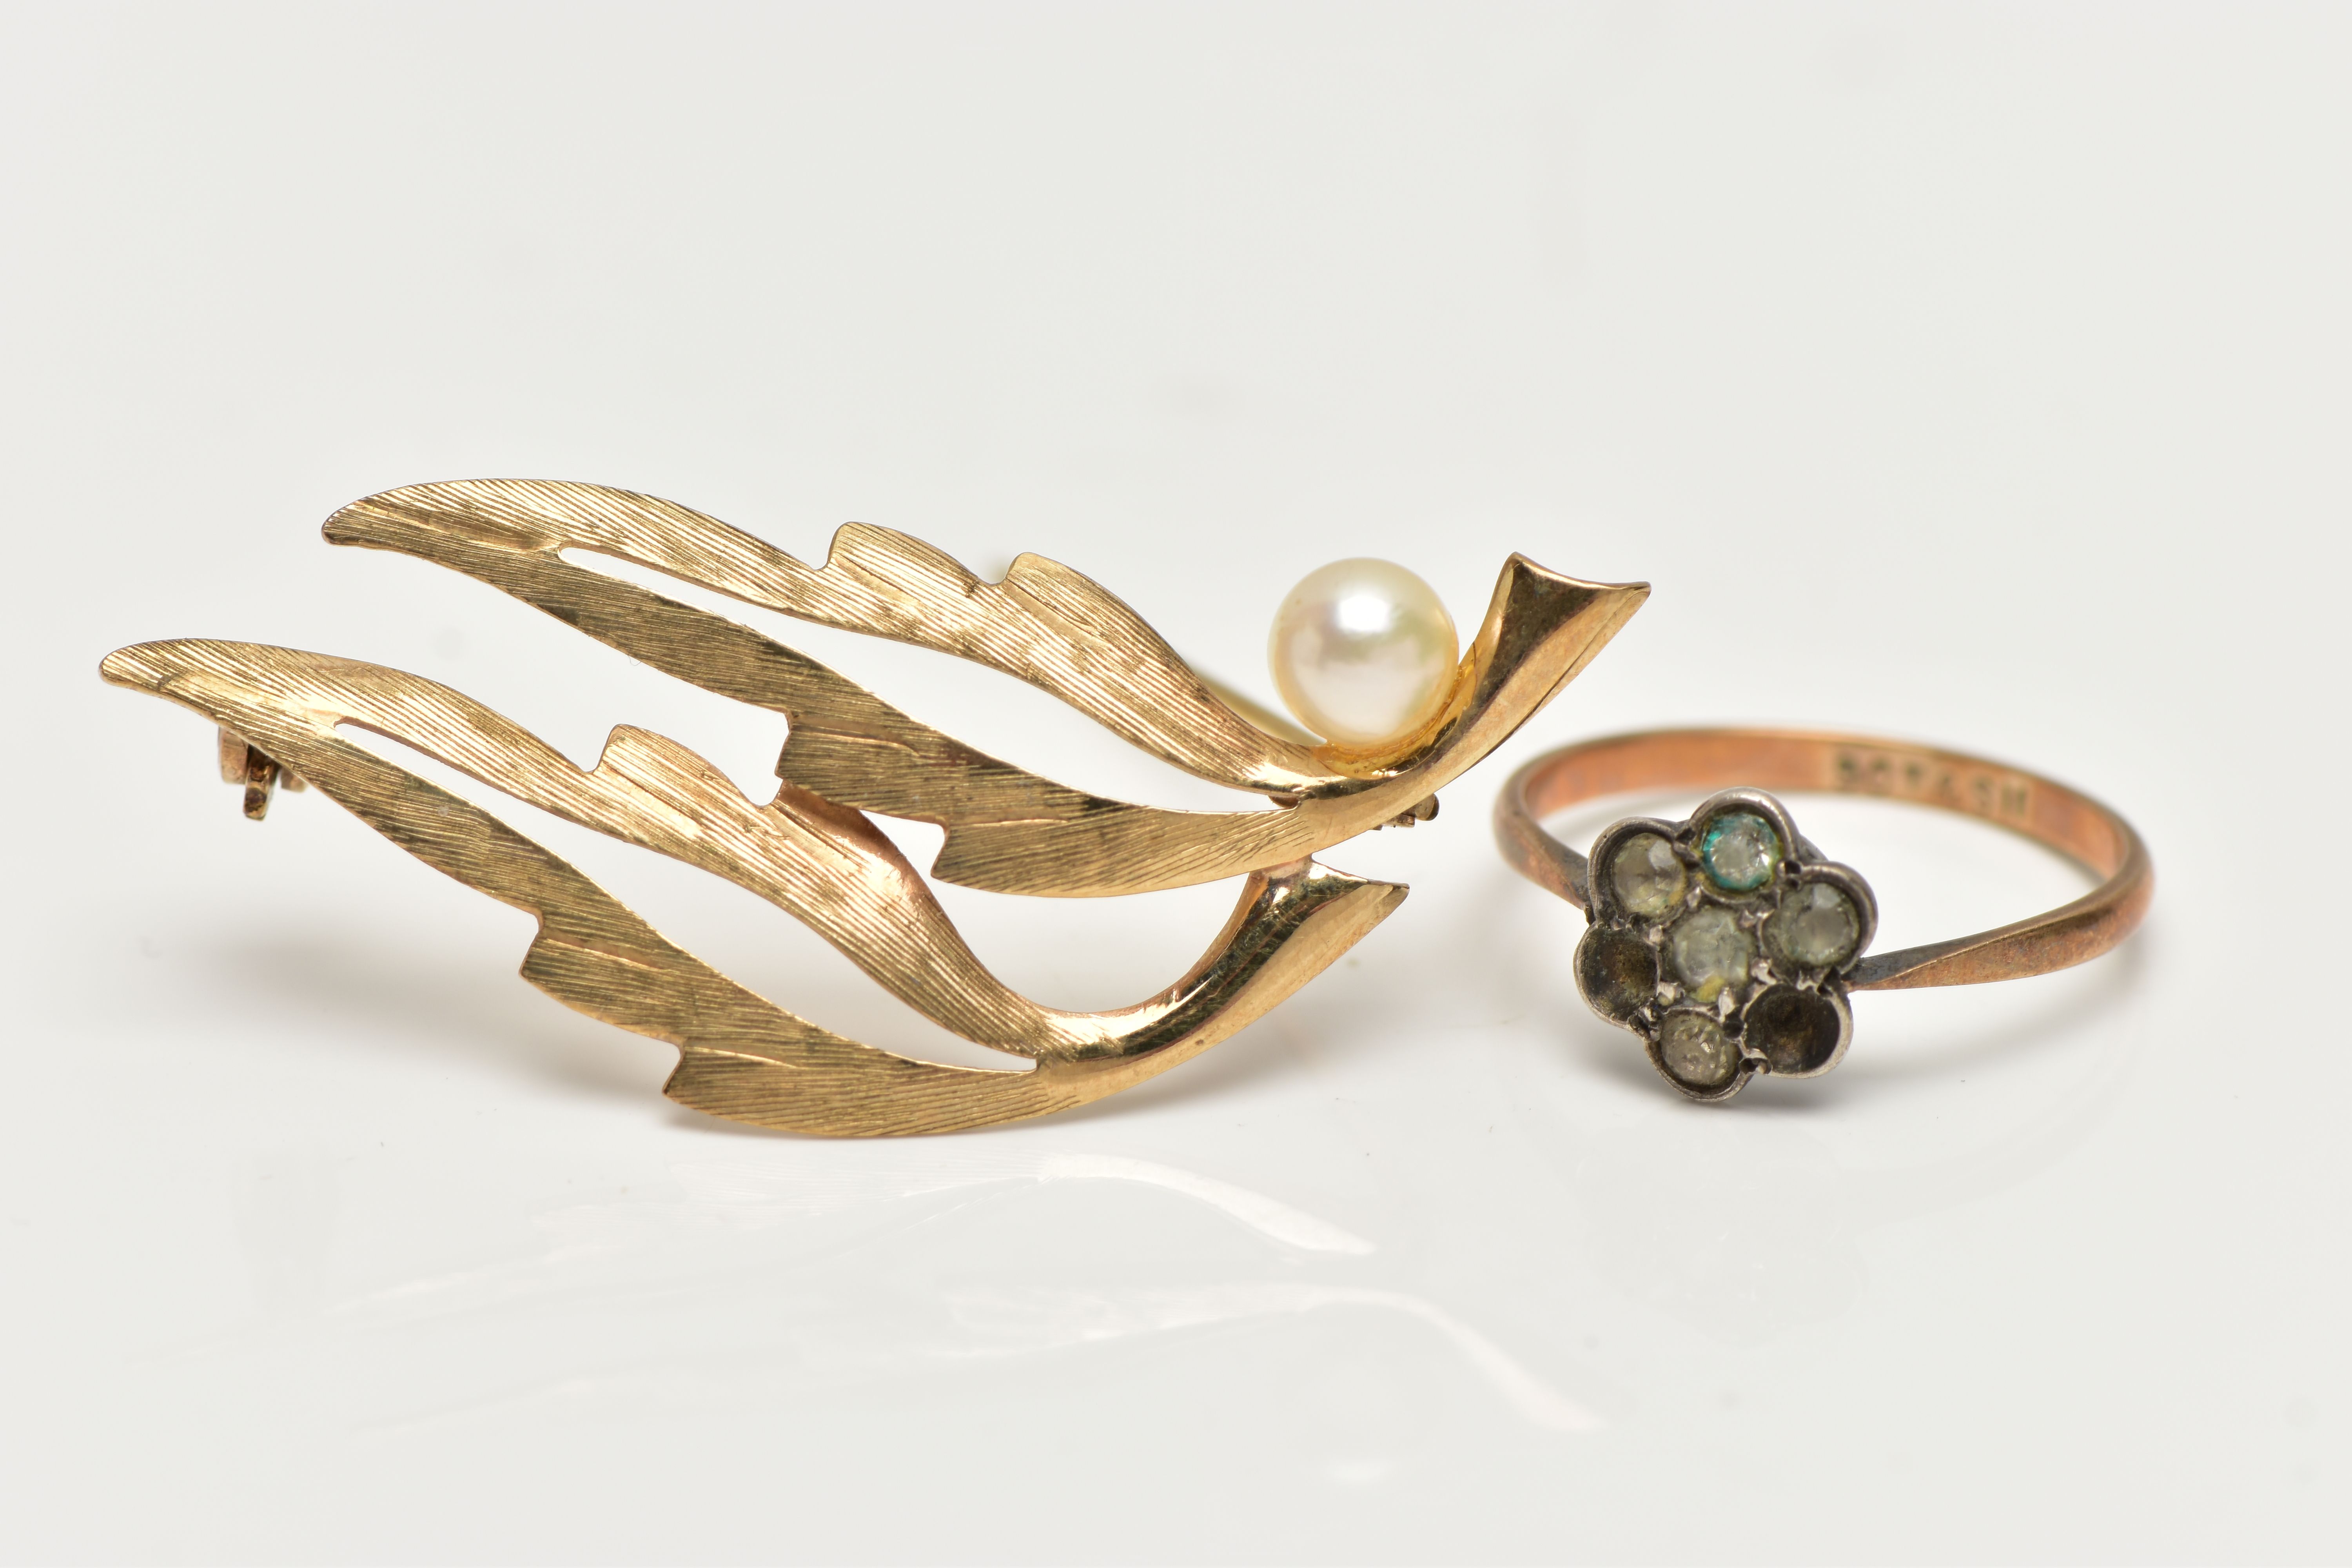 A 9CT GOLD BROOCH AND A RING, openwork leaf brooch set with a single cultured pearl, fitted with a